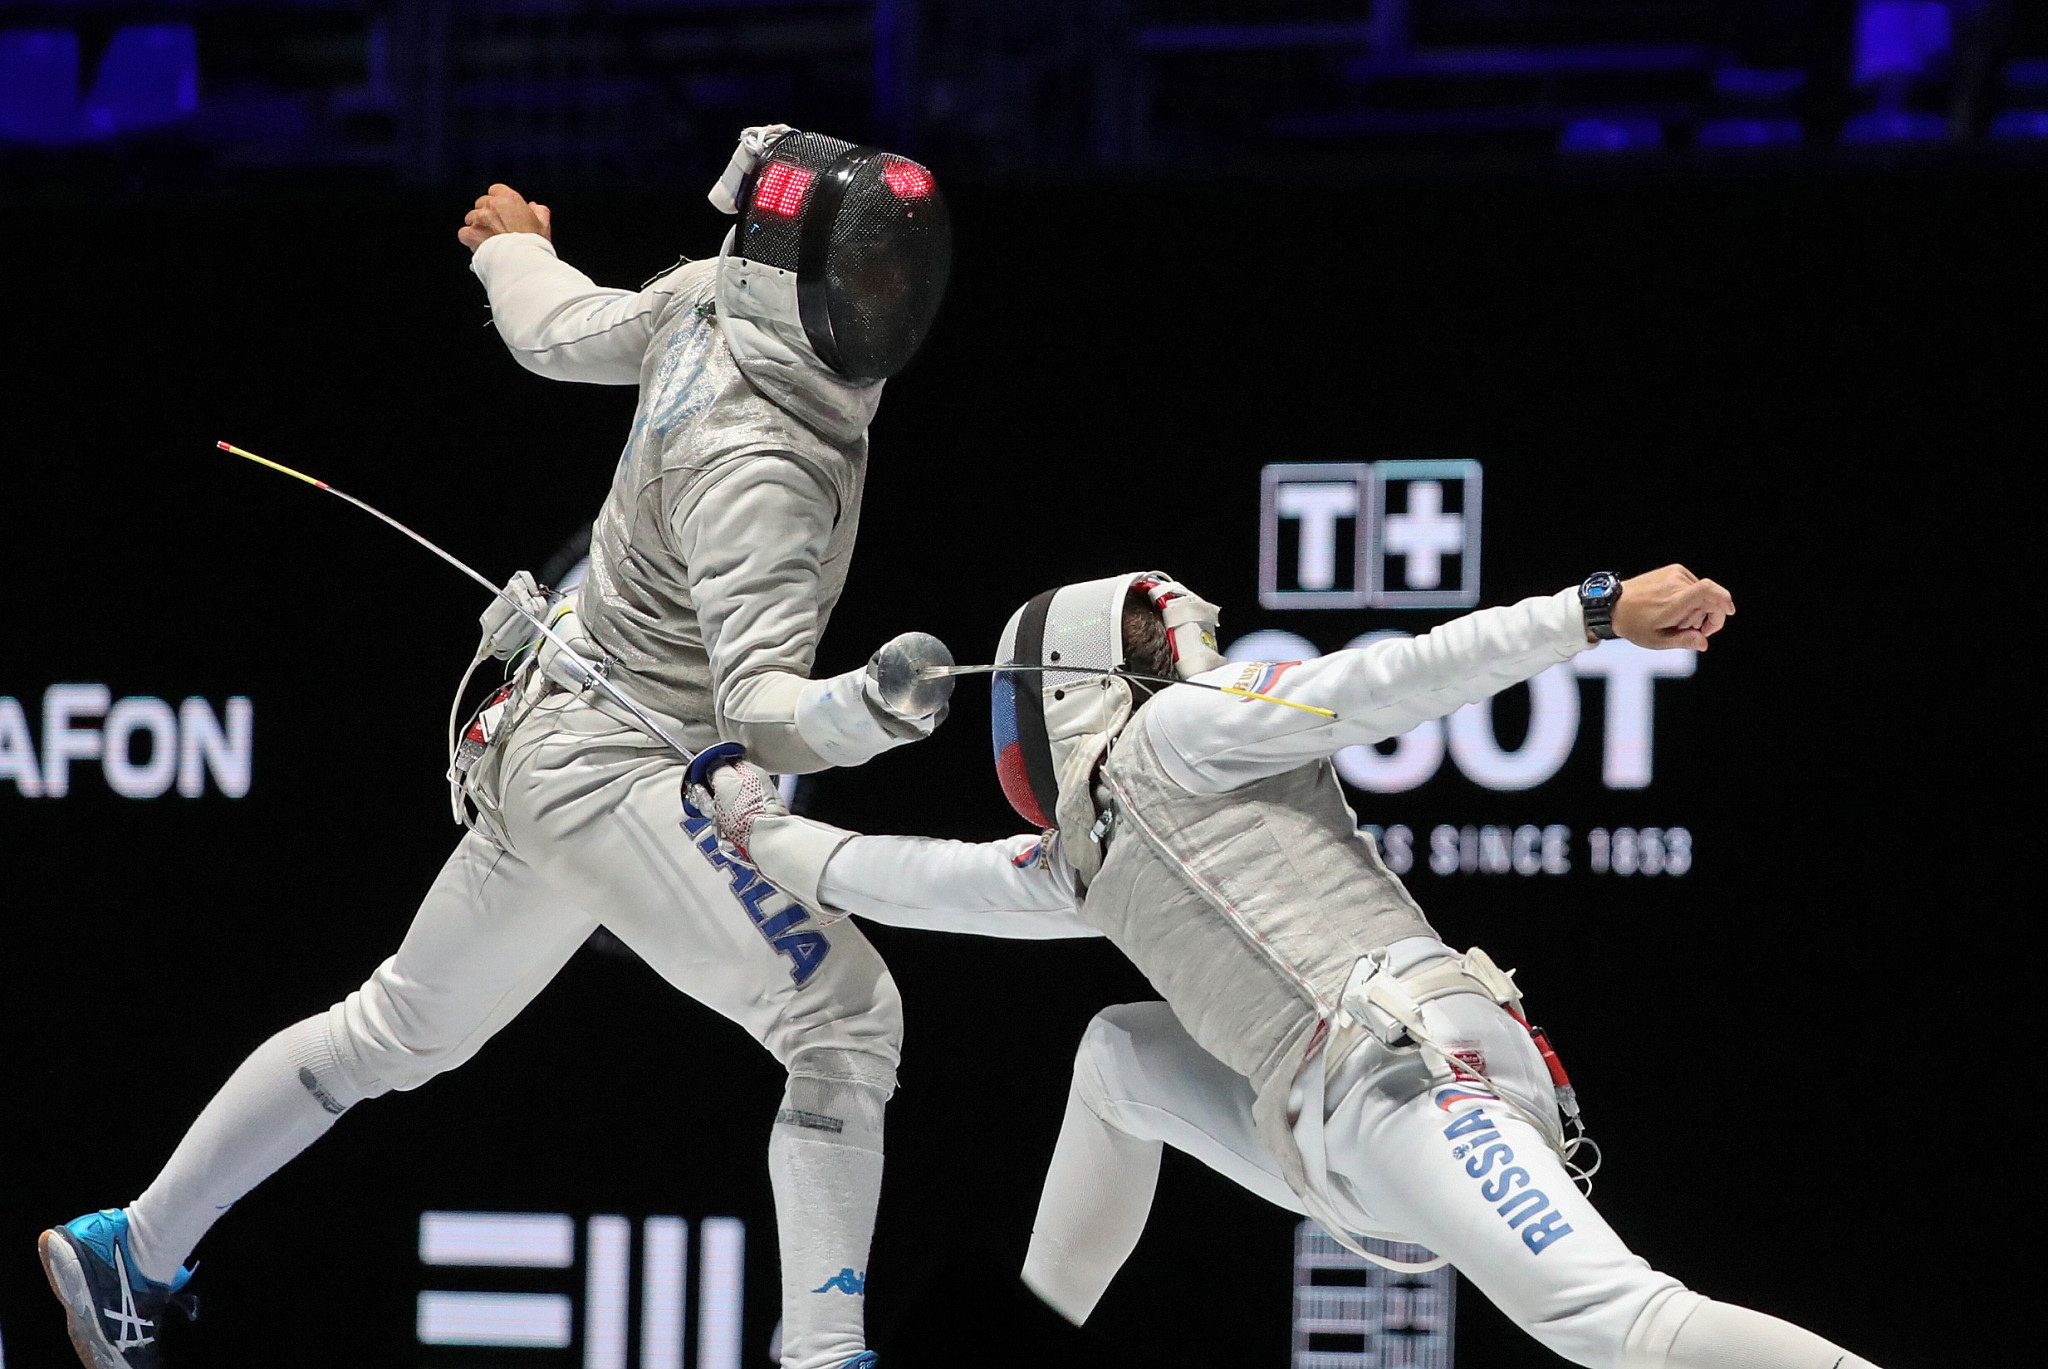 Italy's Alessio Foconi is the top seed at the FIE Men's Foil World Cup in Bonn ©Getty Images